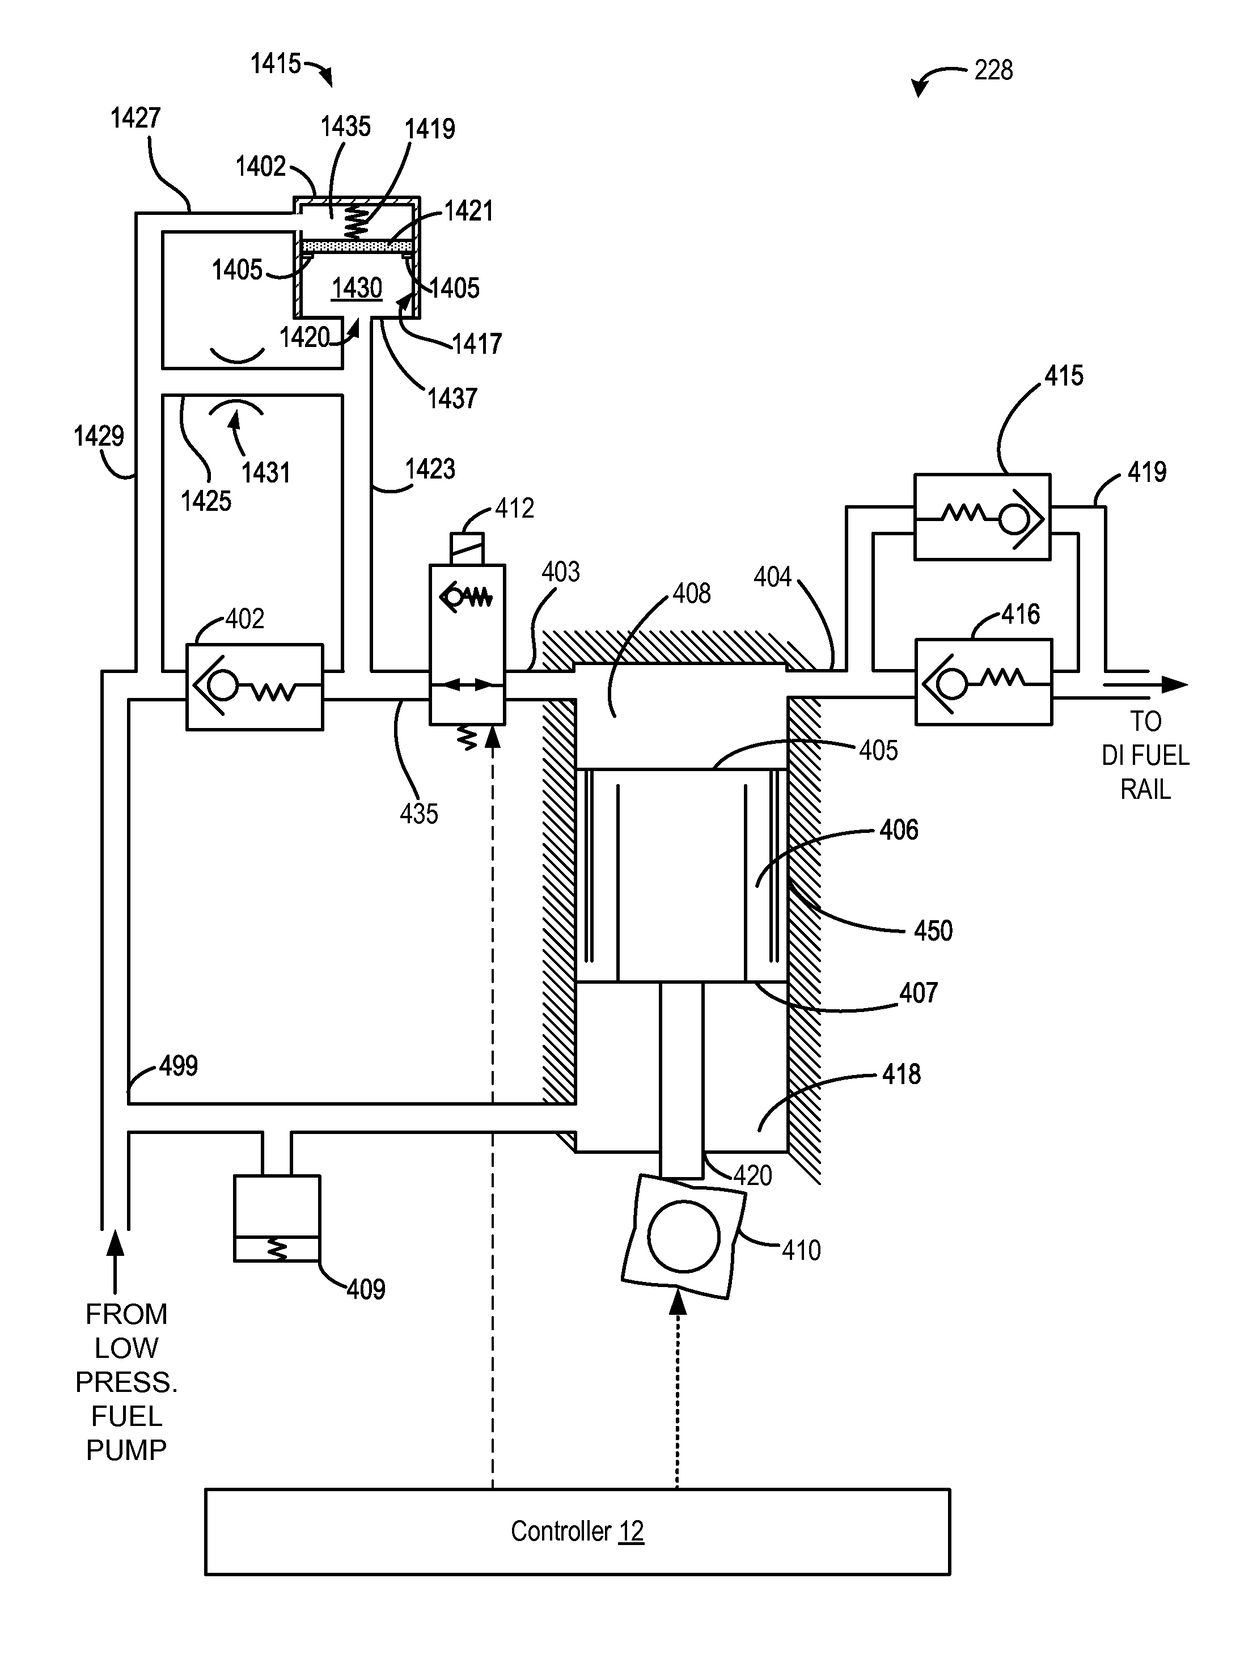 Direct injection fuel pump